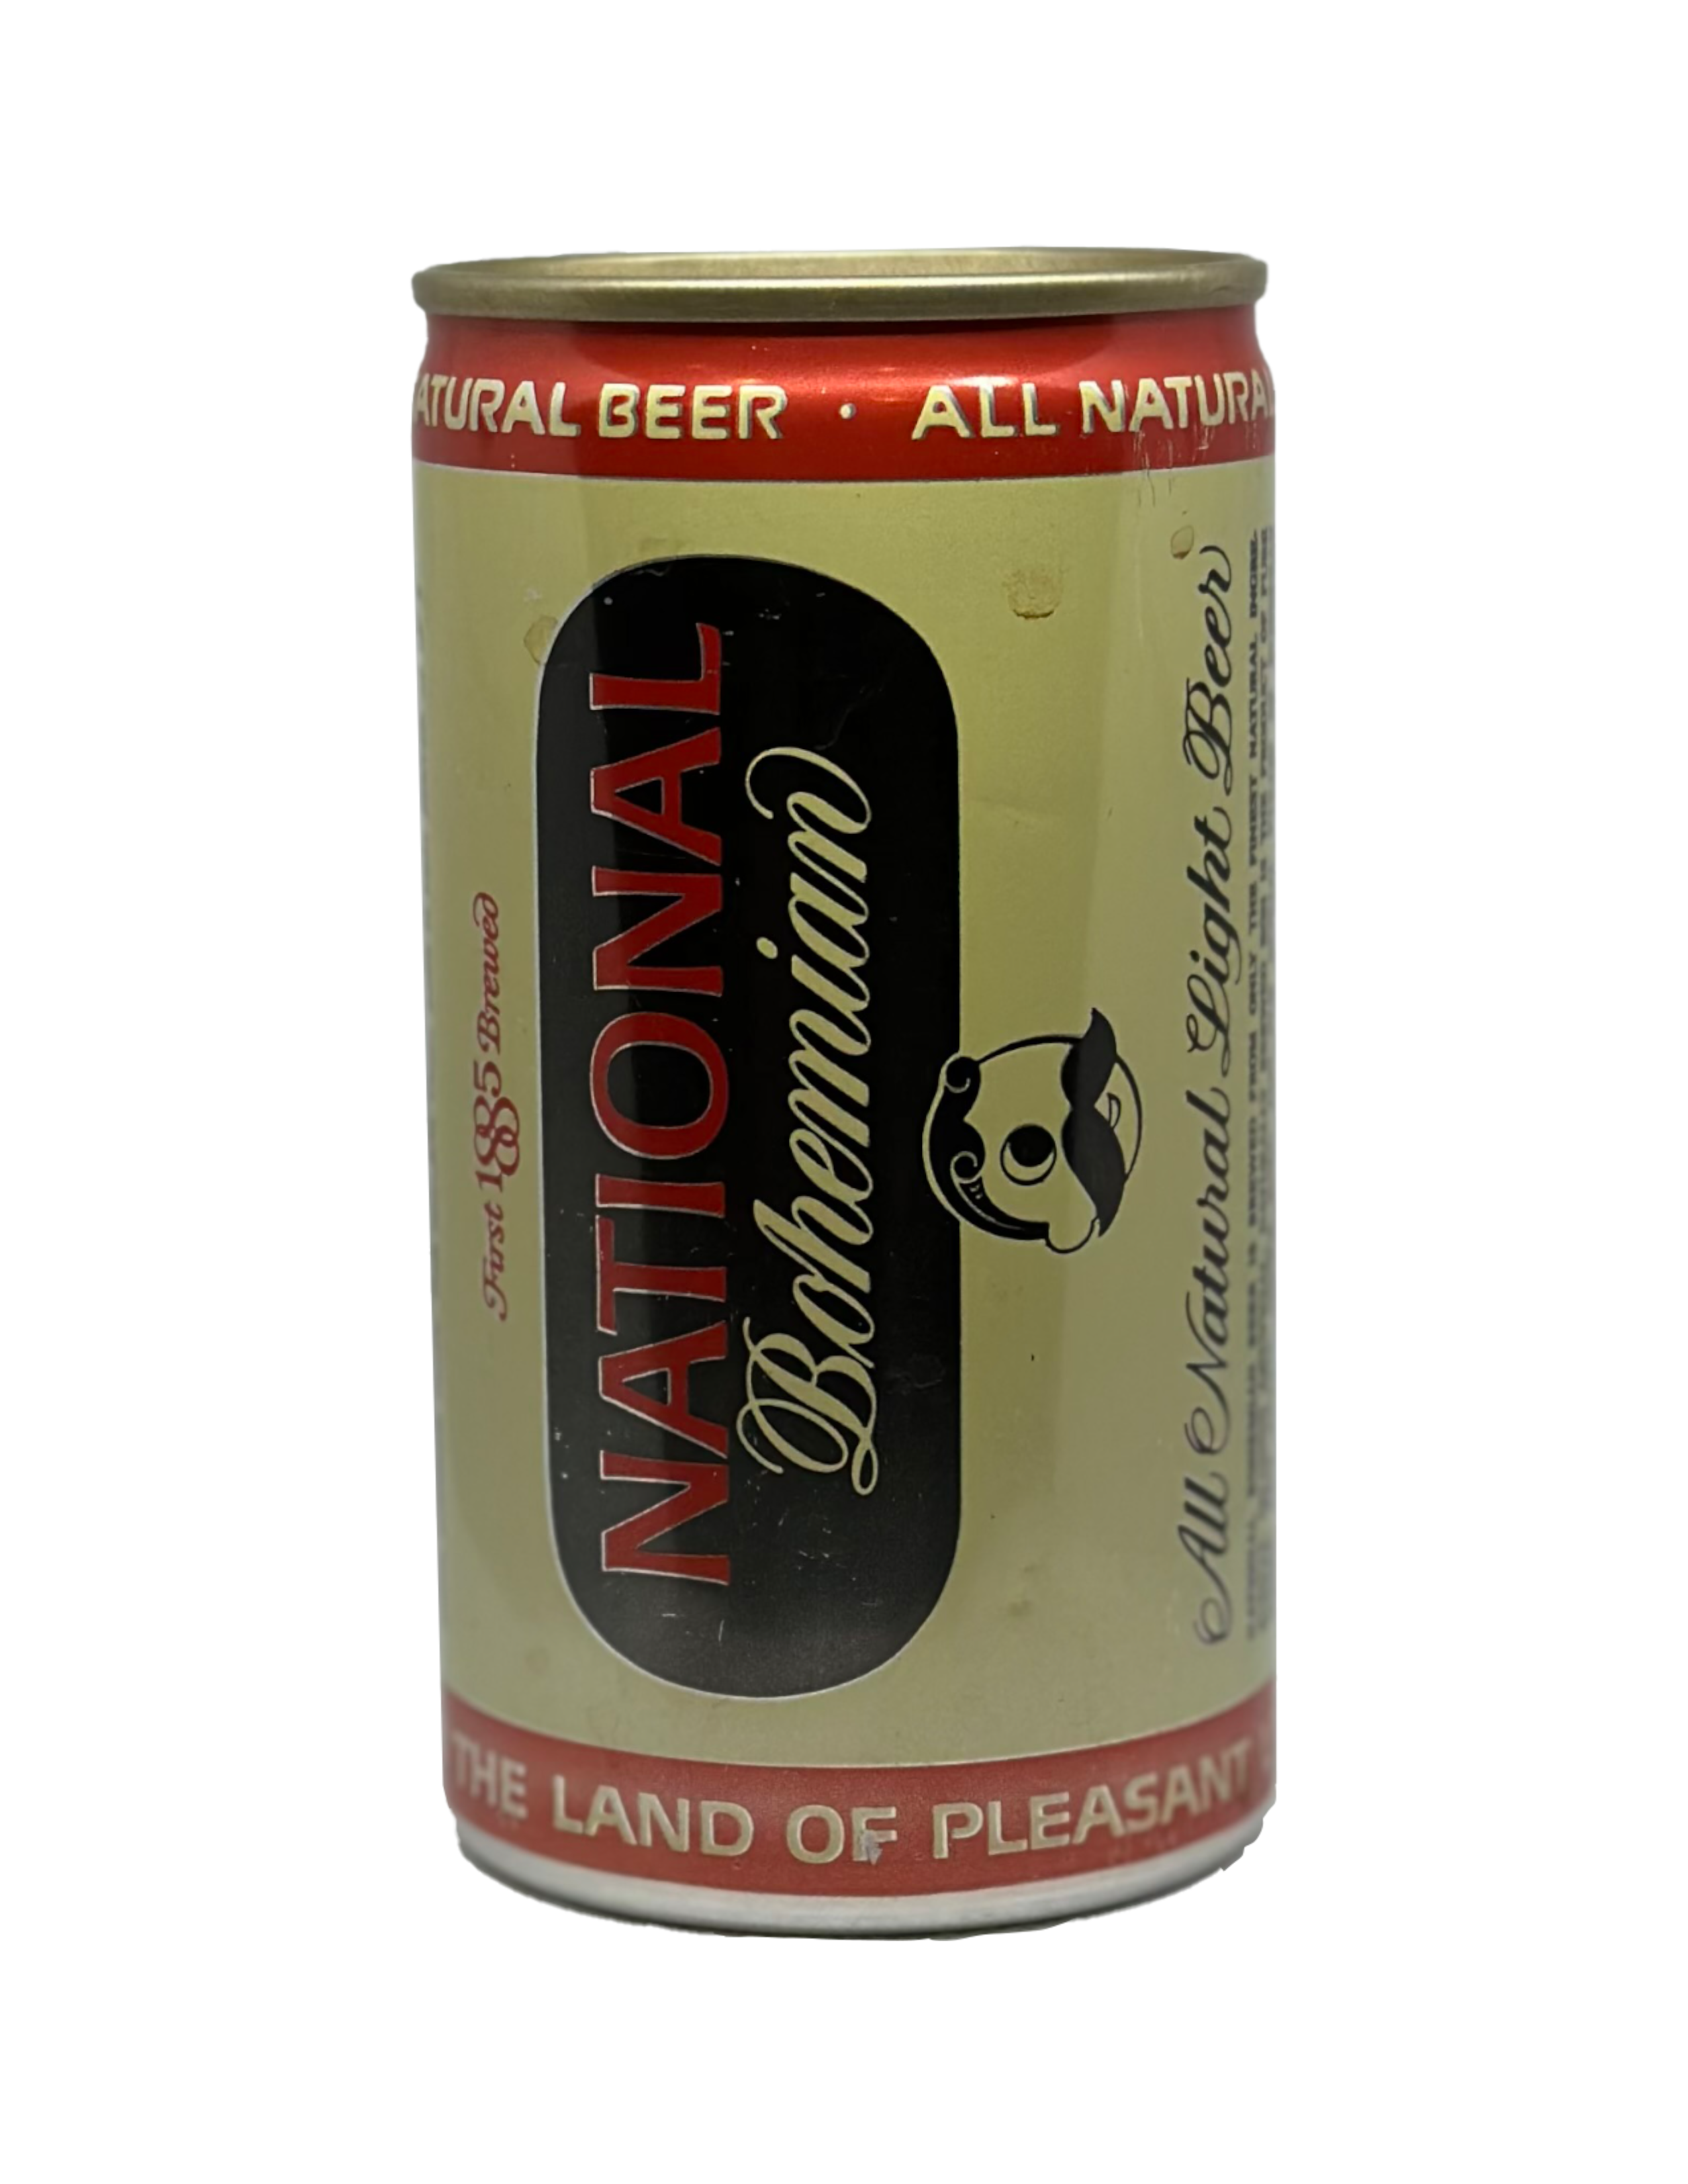 national bohemian beer can with a flat-top design, gold label, and script typeface for the logotype